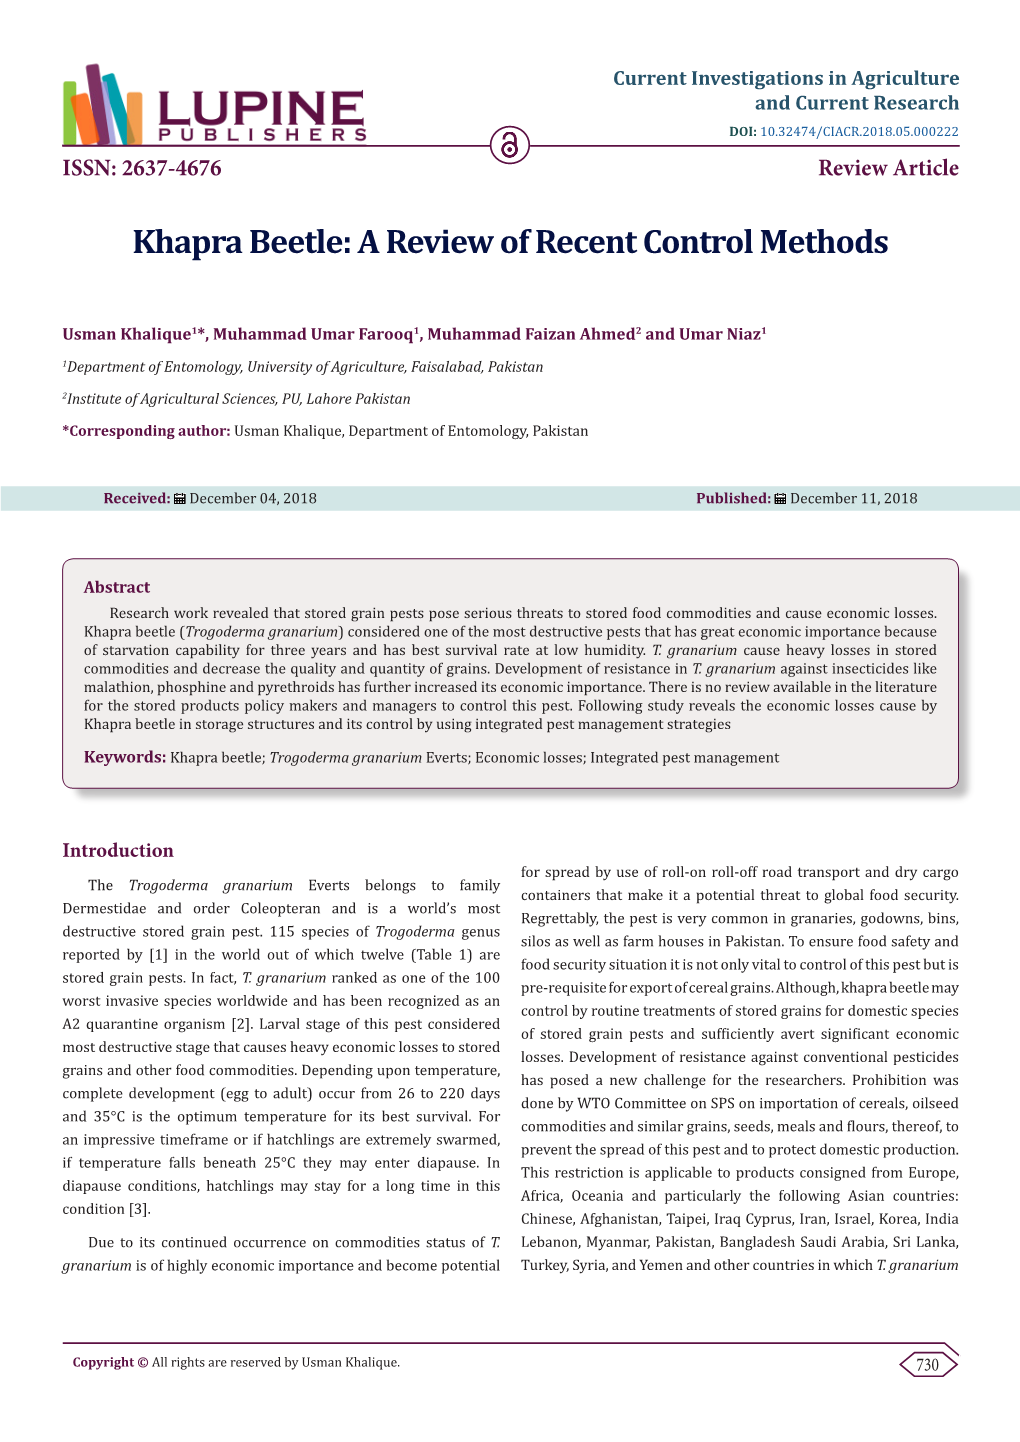 Khapra Beetle: a Review of Recent Control Methods